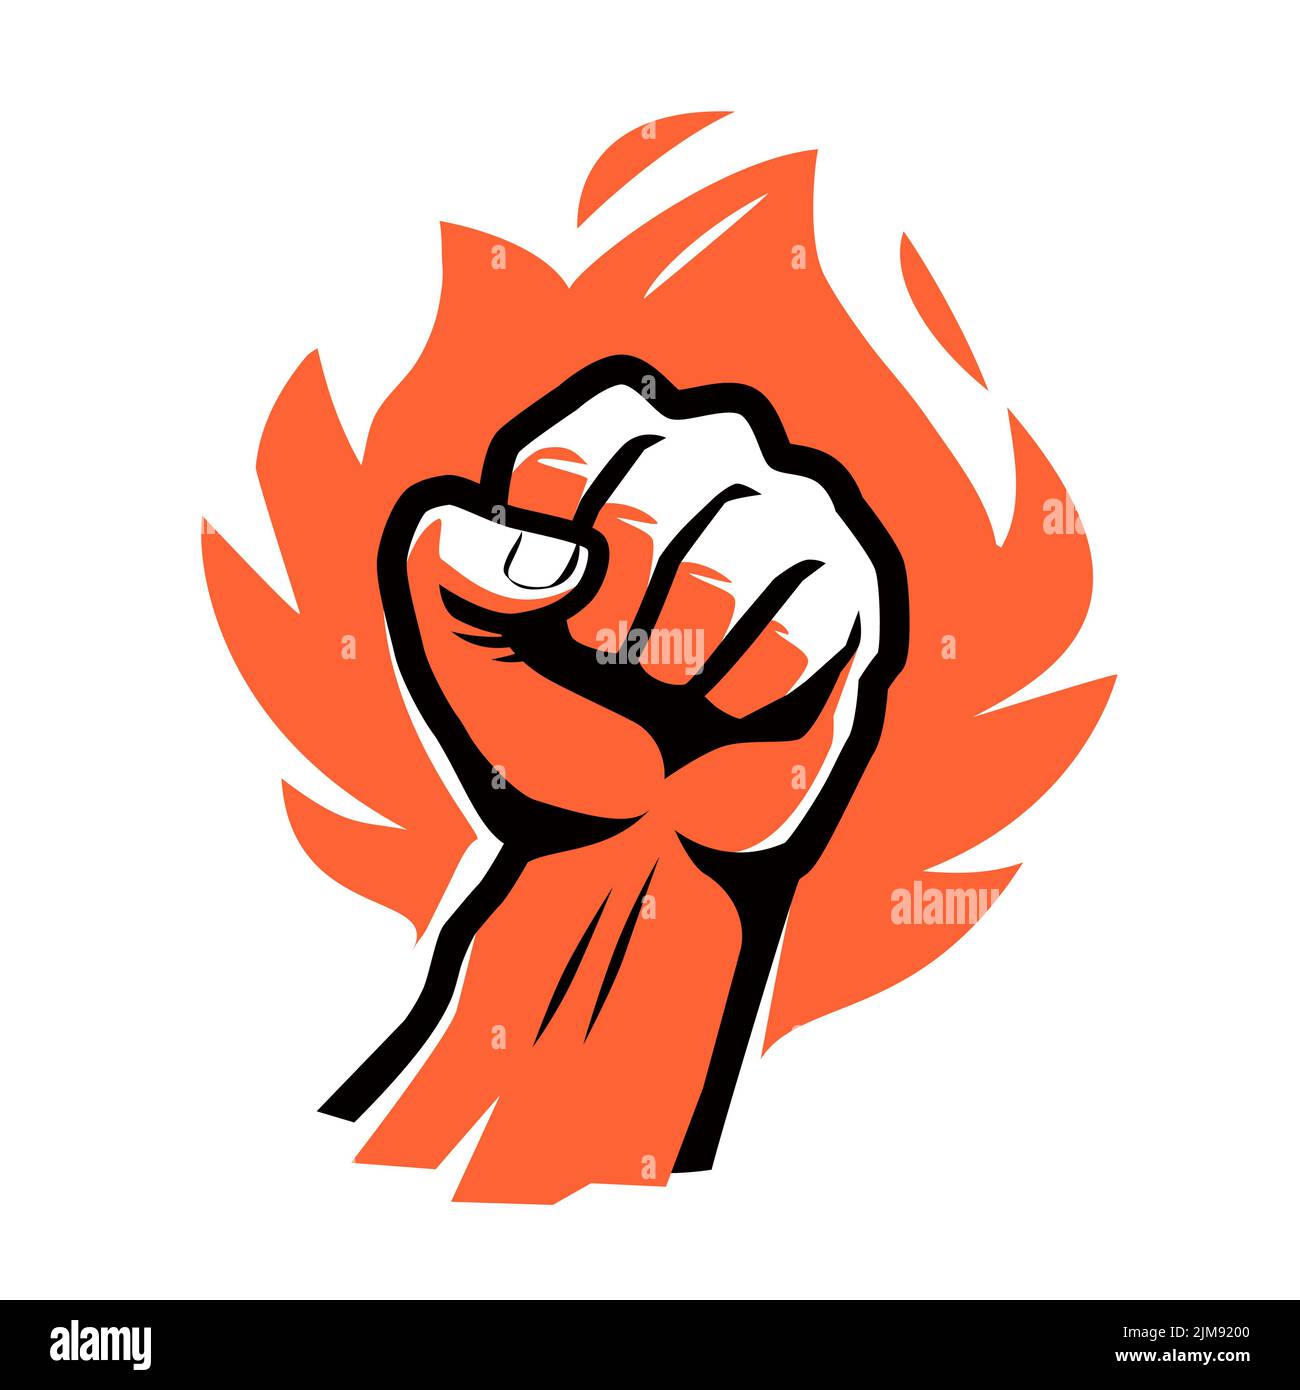 Flaming red fiery fist emblem. Clenched fist in burning fire badge or logo. Symbol strength, power vector illustration Stock Vector